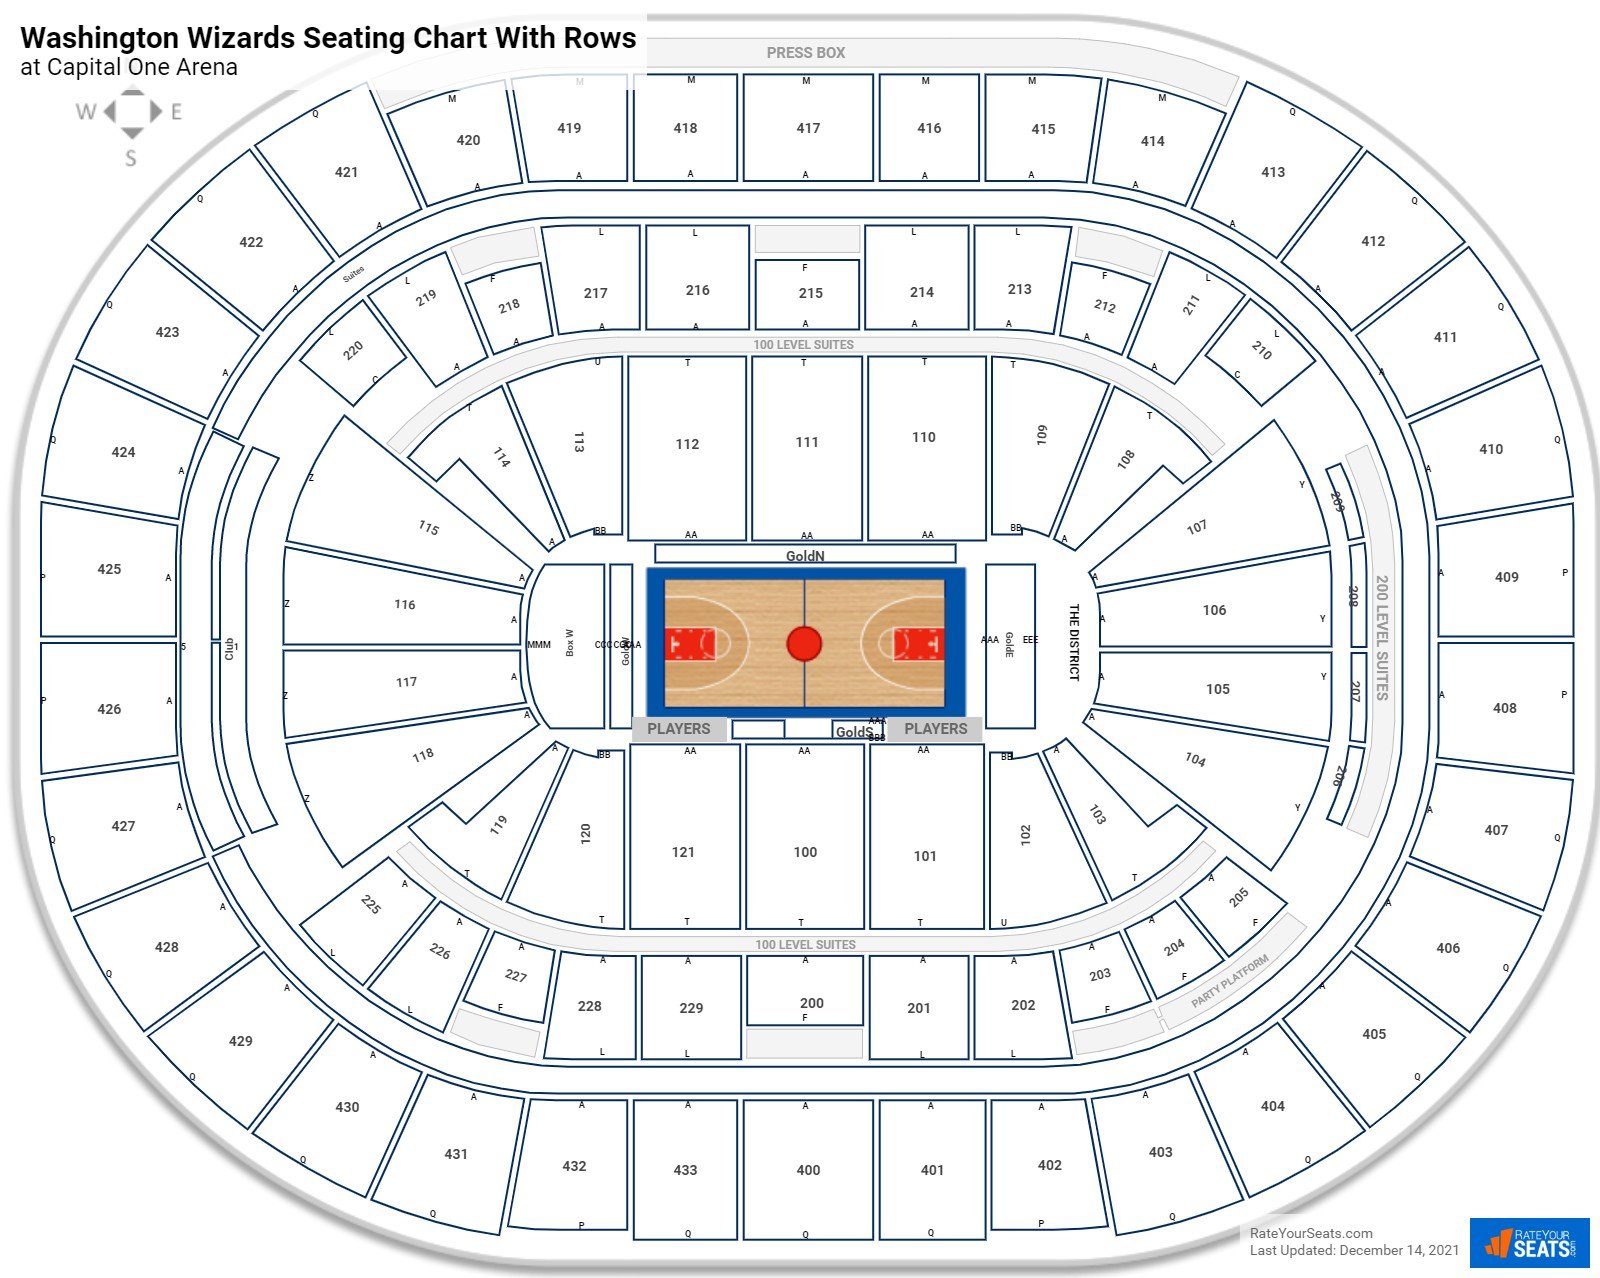 Capital One Arena seating chart with row numbers